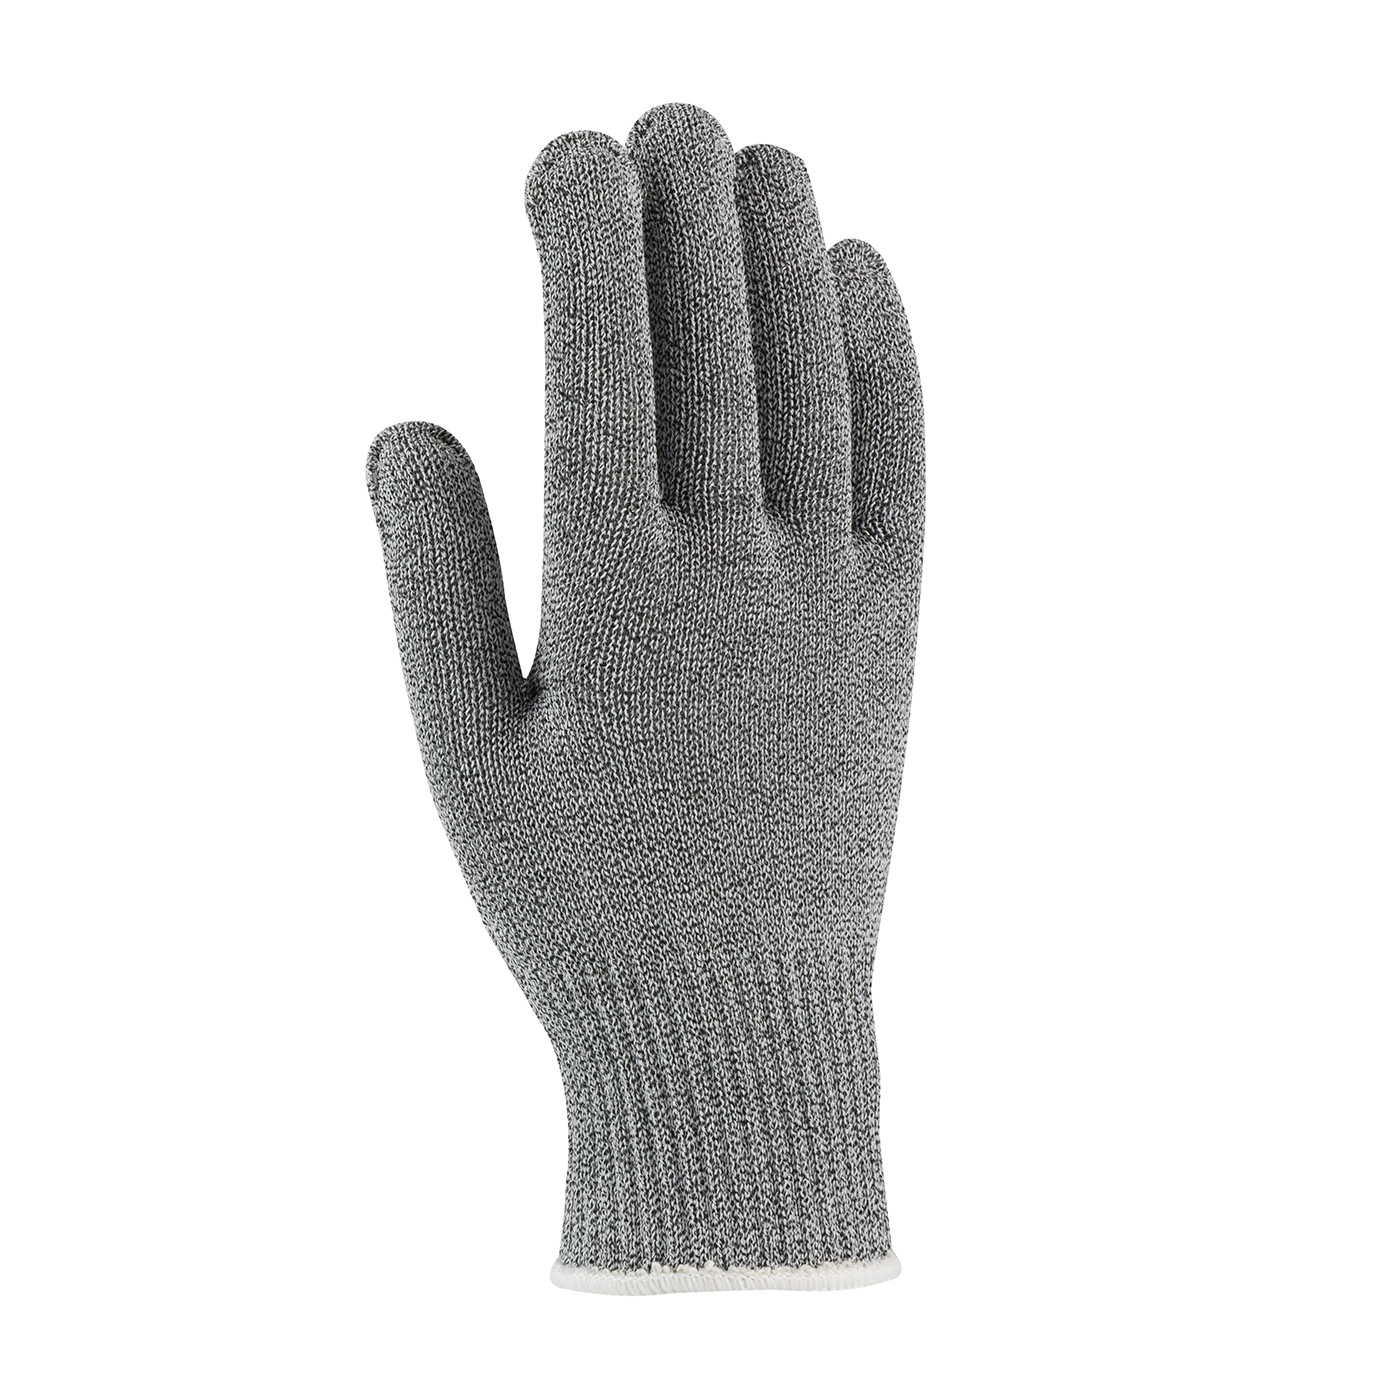 PIP Kut Gard® Gray Seamless Knit Antimicrobial/Dyneema® Cut Resistant Gloves - Light Weight